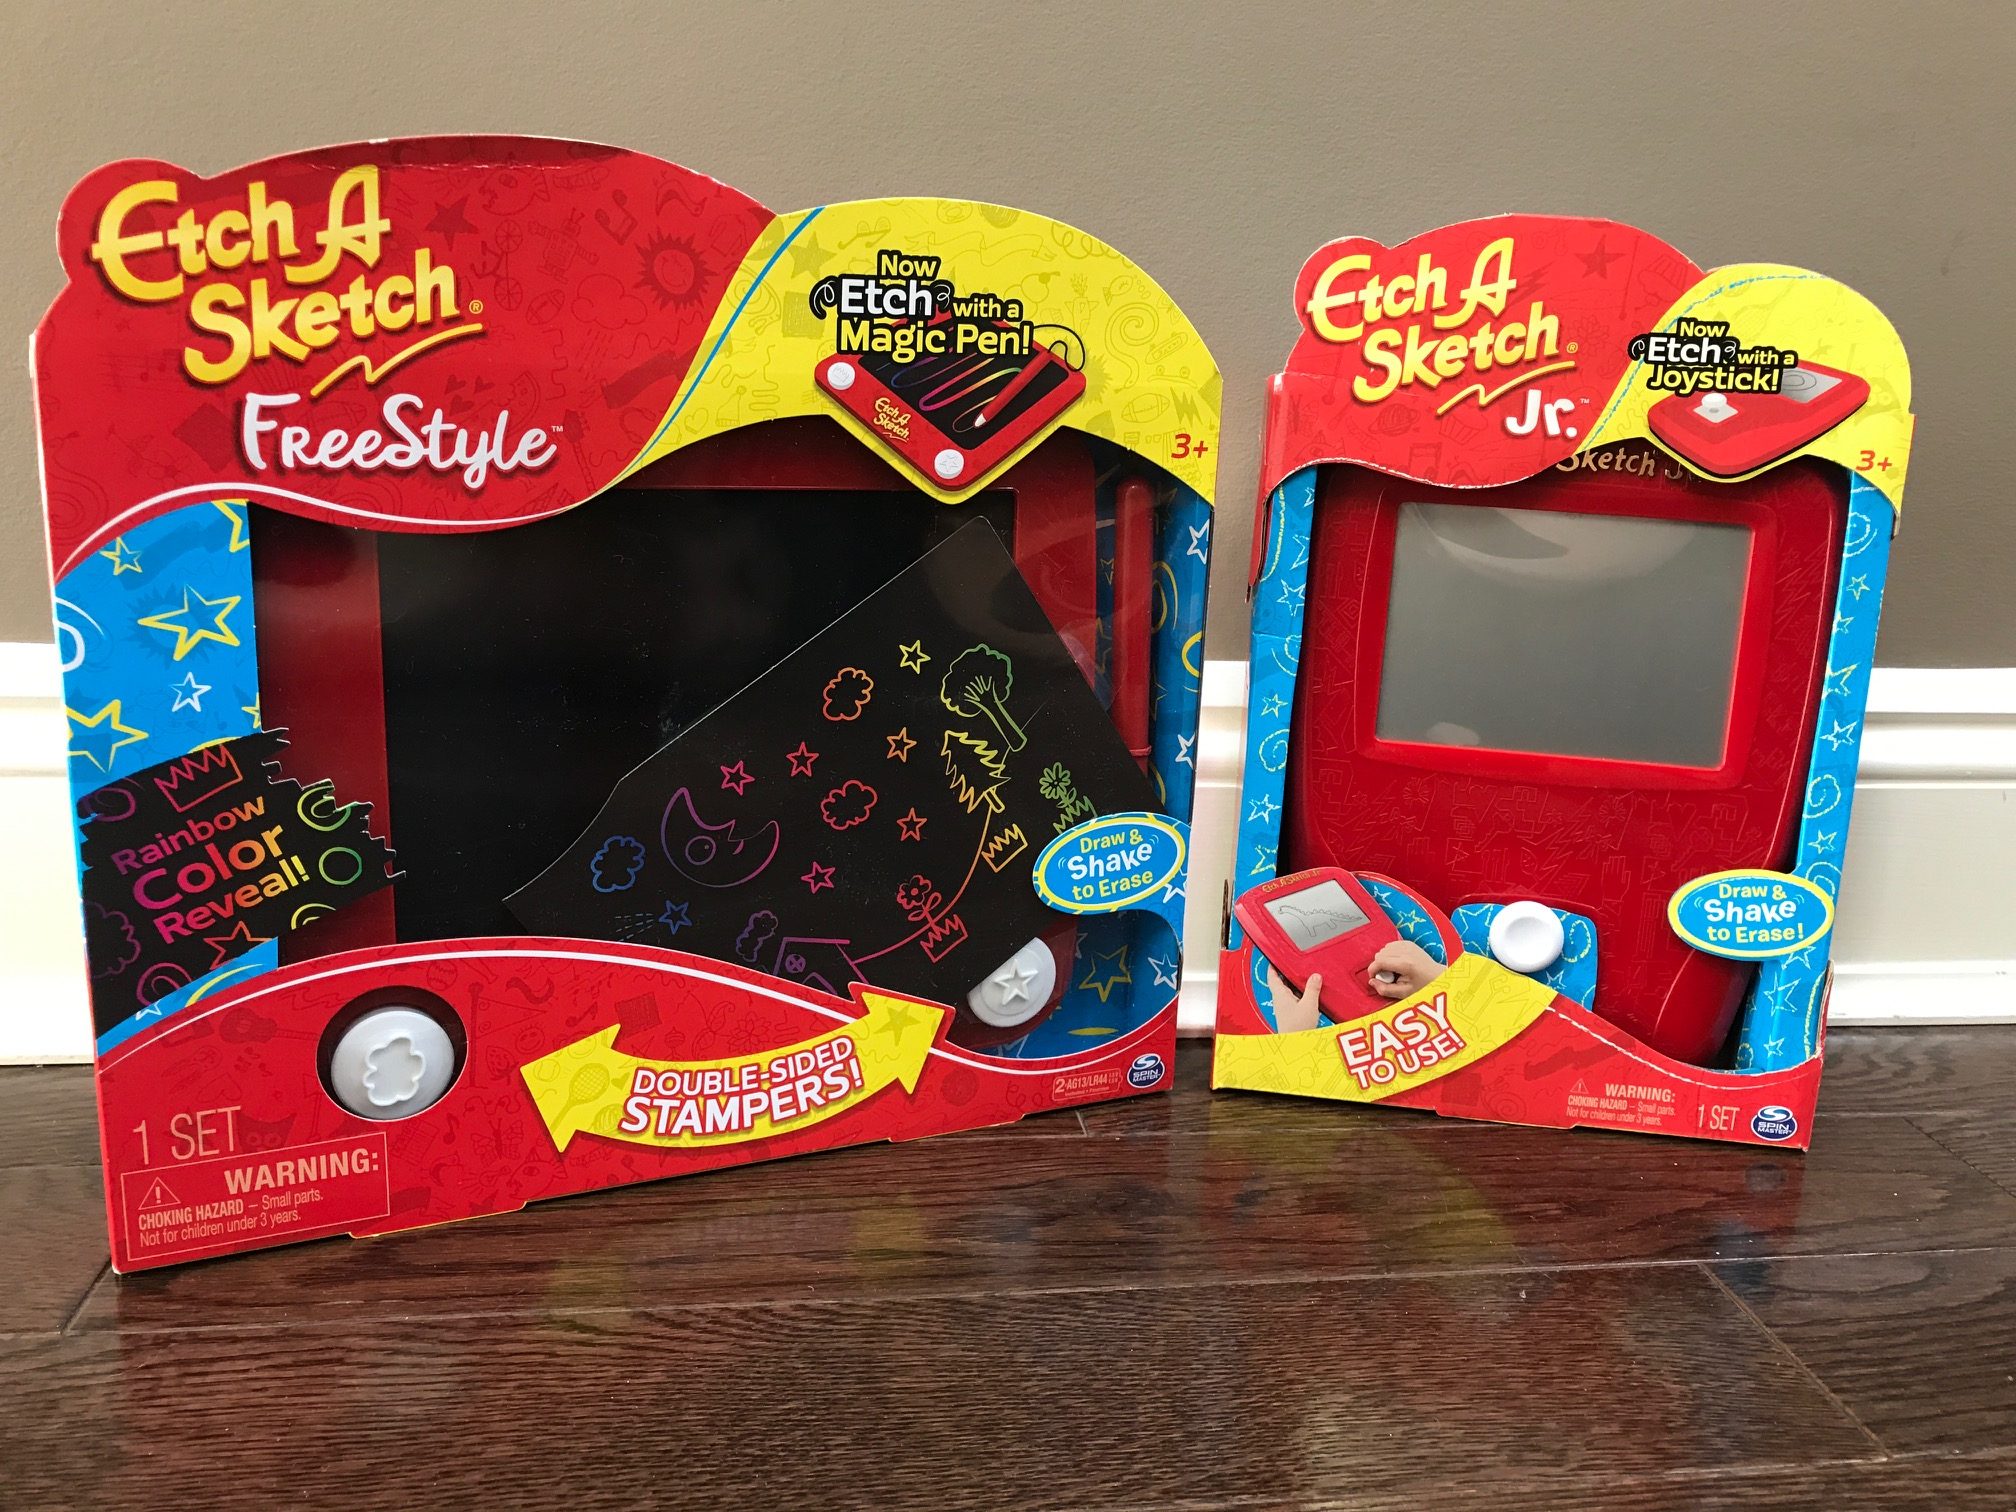 Etch A Sketch Freestyle: Makes Your Child Learn with the Fun of Drawing